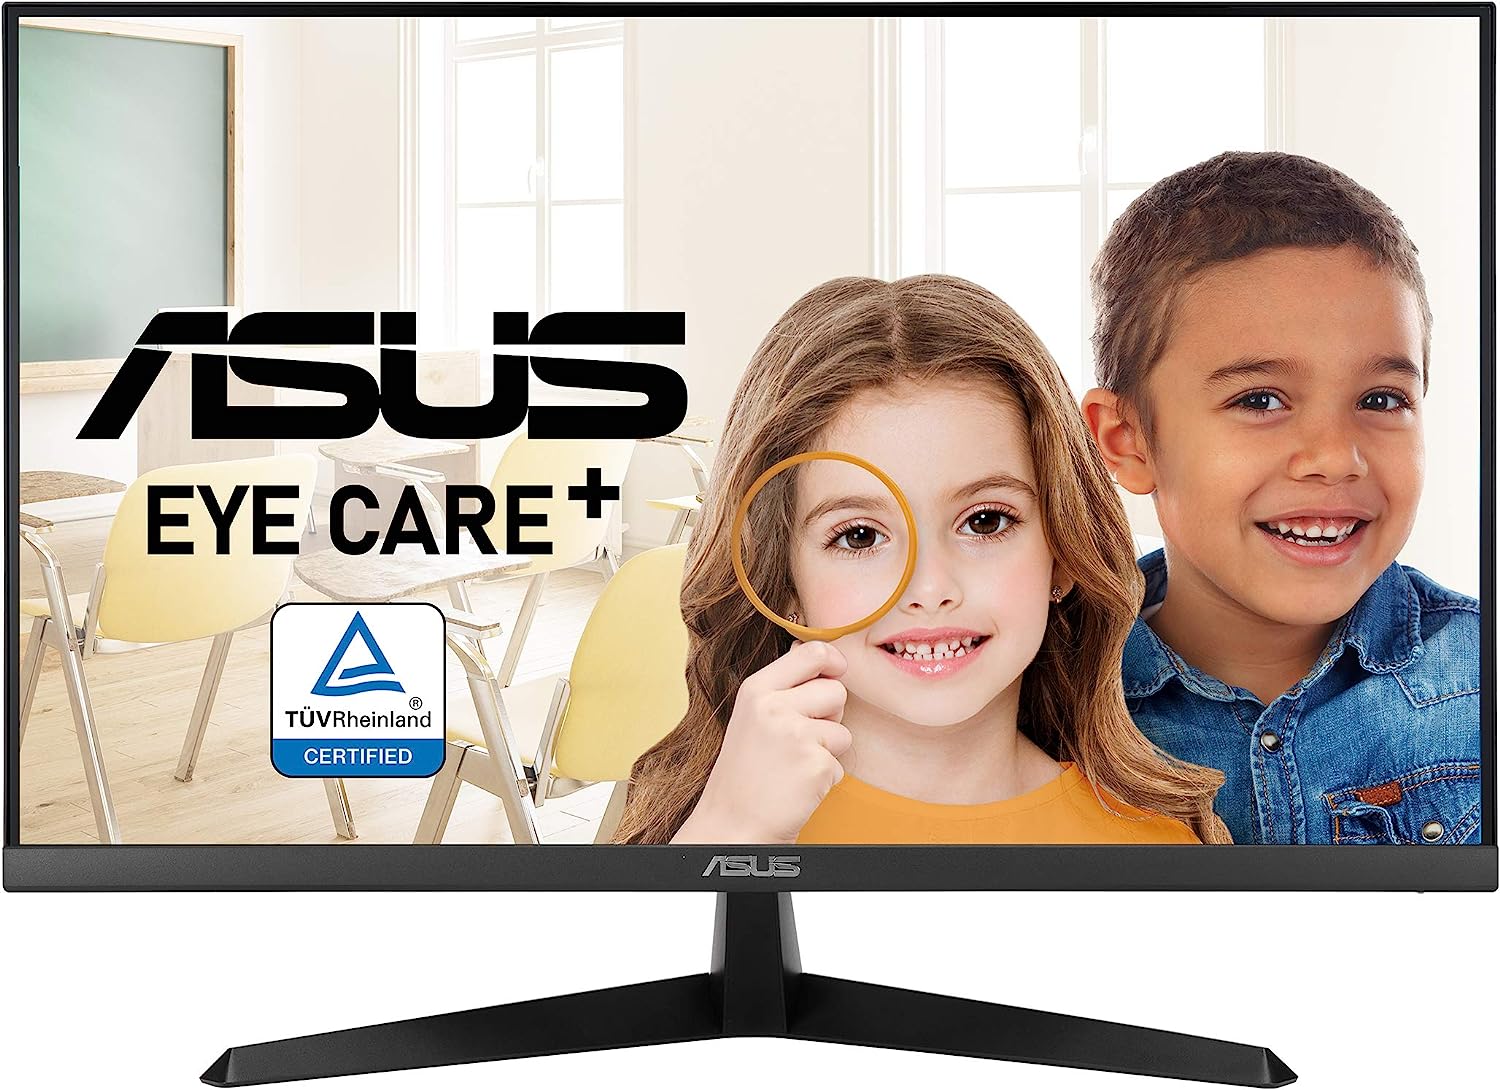 ASUS VY279HE 27” Eye Care Monitor, 1080P Full HD, [...]